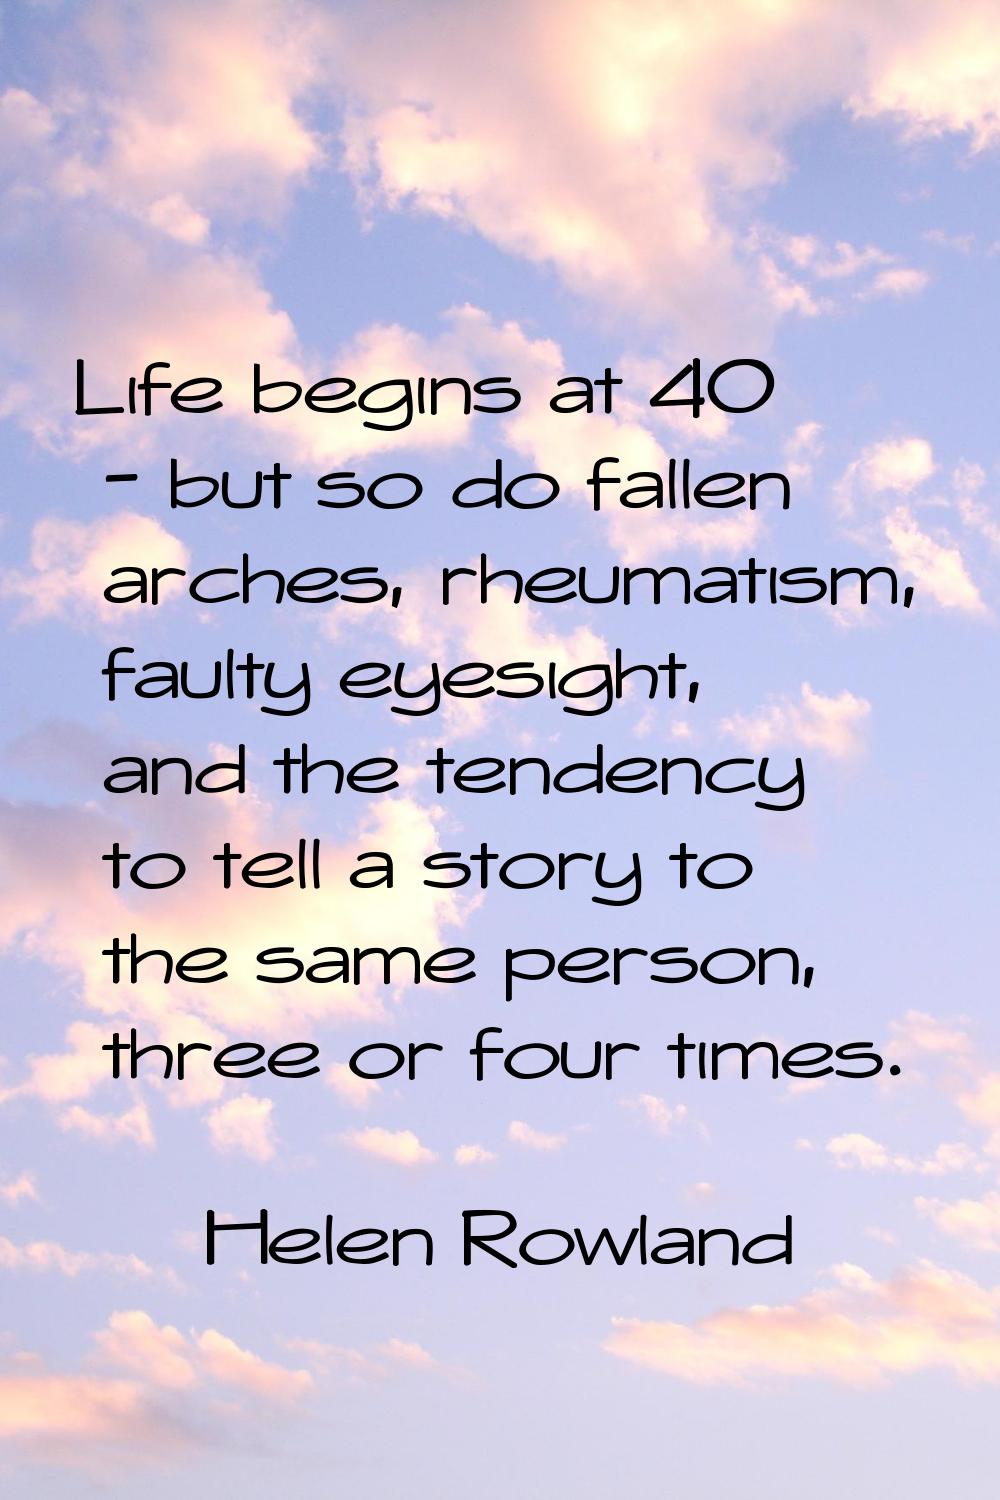 Life begins at 40 - but so do fallen arches, rheumatism, faulty eyesight, and the tendency to tell 